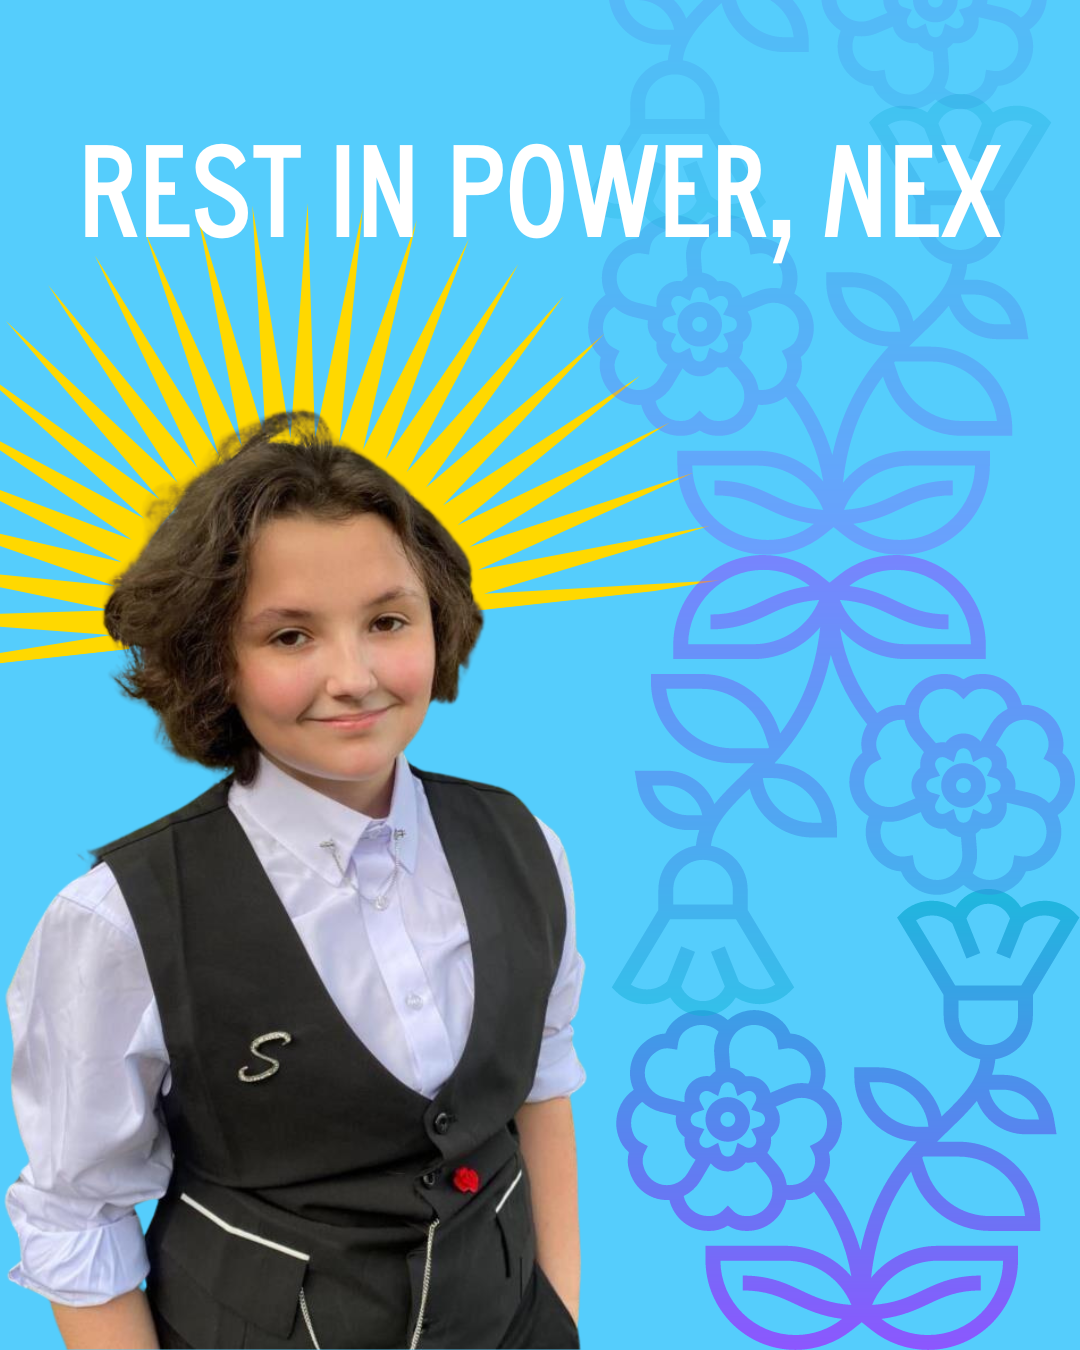 A blue background with a photo of Nex and text Rest in Power, Nex with a Cherokee rose motif to the right.